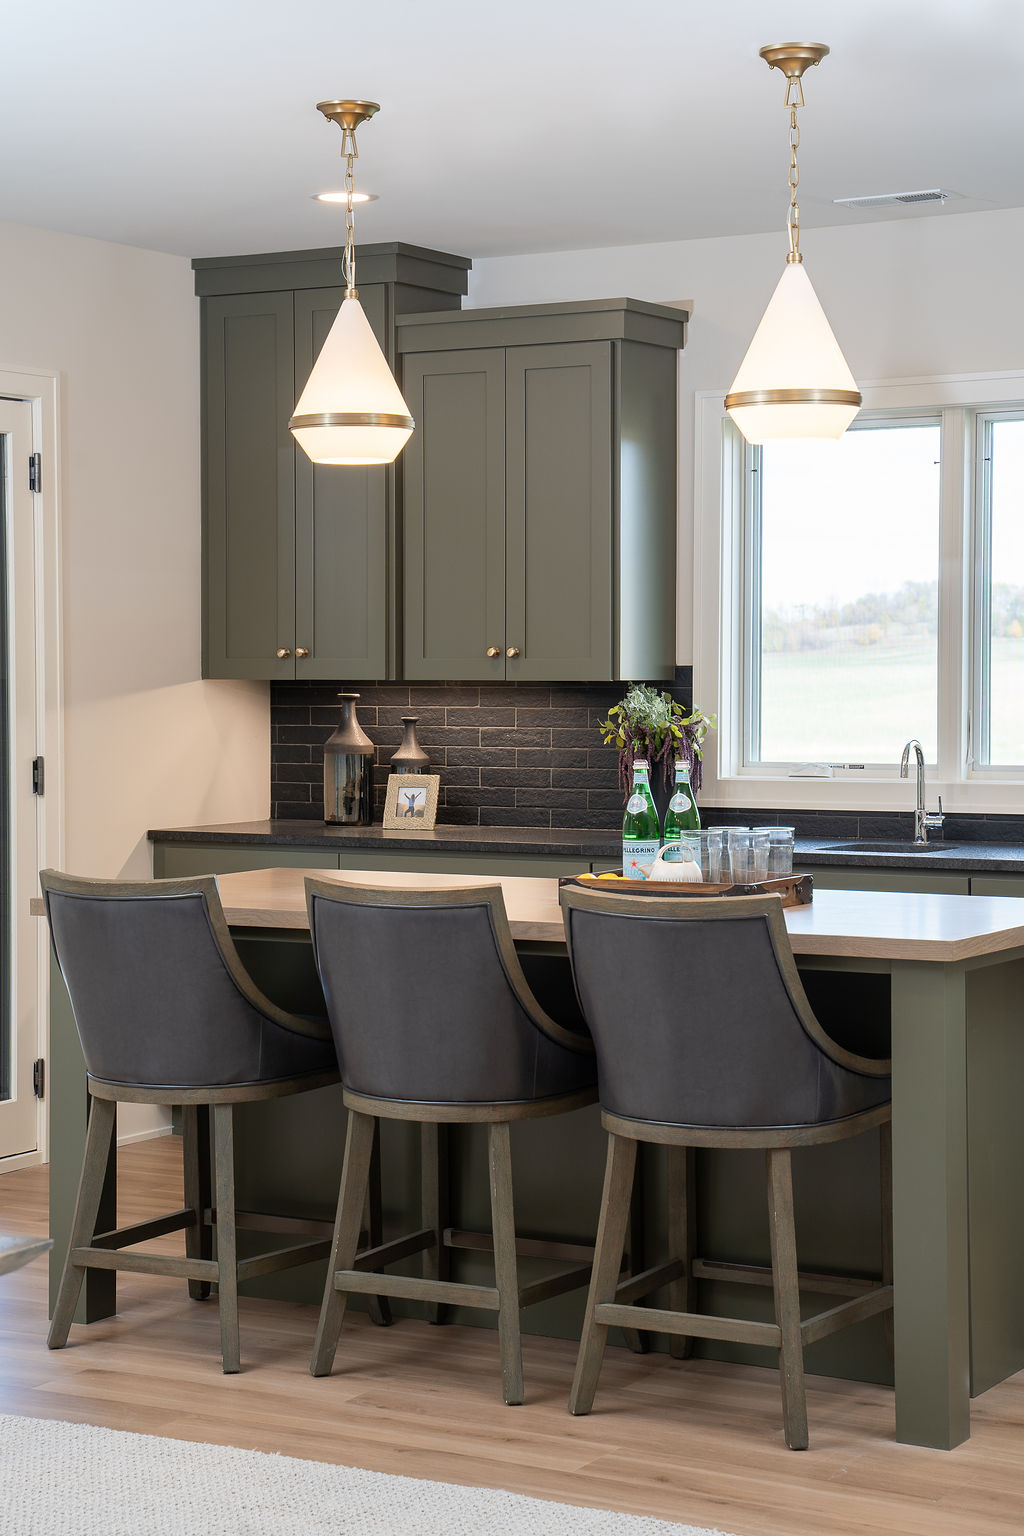 A prairie transitional kitchen with a center island and bar stools.